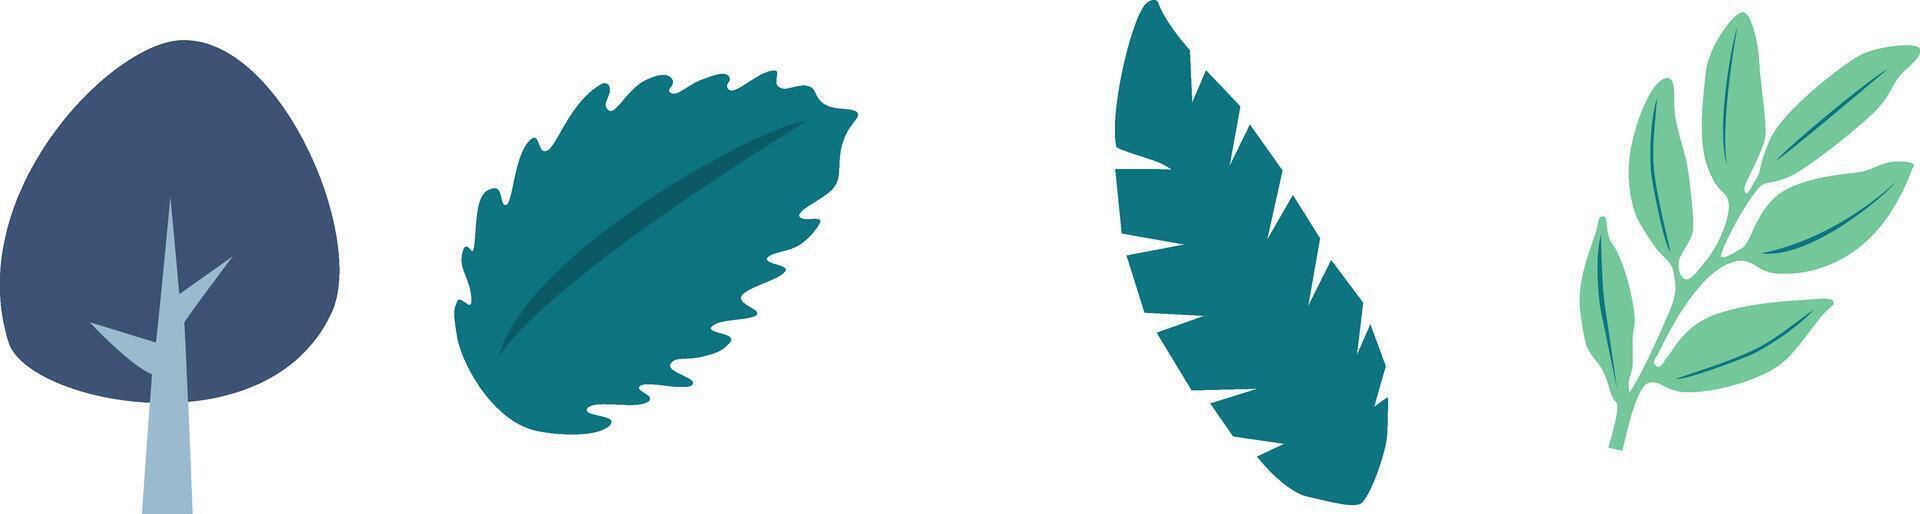 Foliage and leaves vector icons colored and outlined